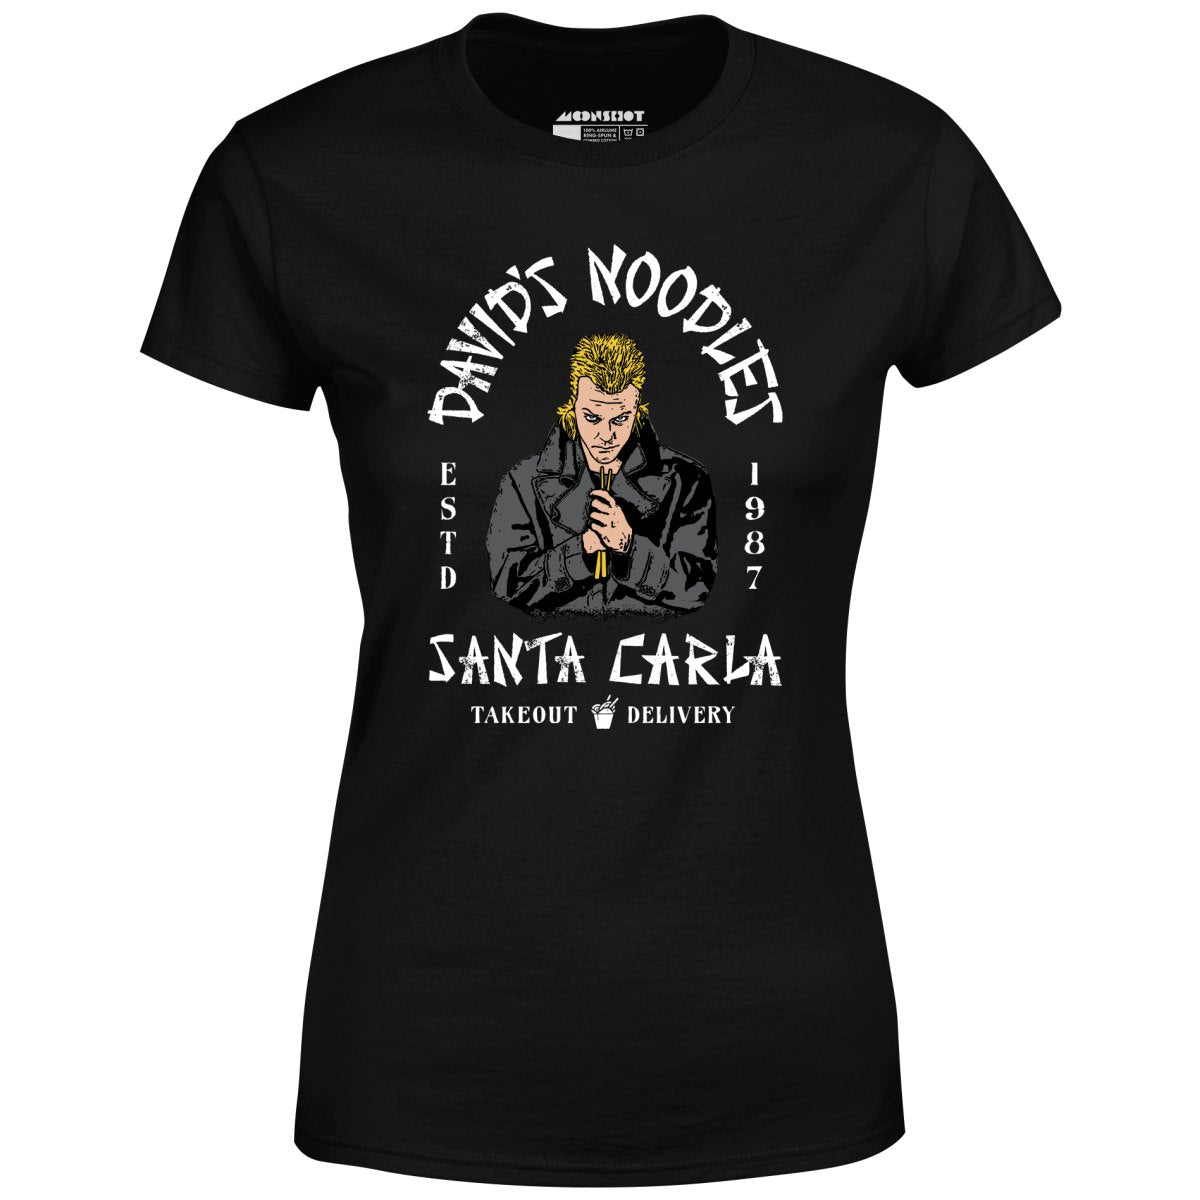 David's Noodles - Takeout & Delivery - Women's T-Shirt